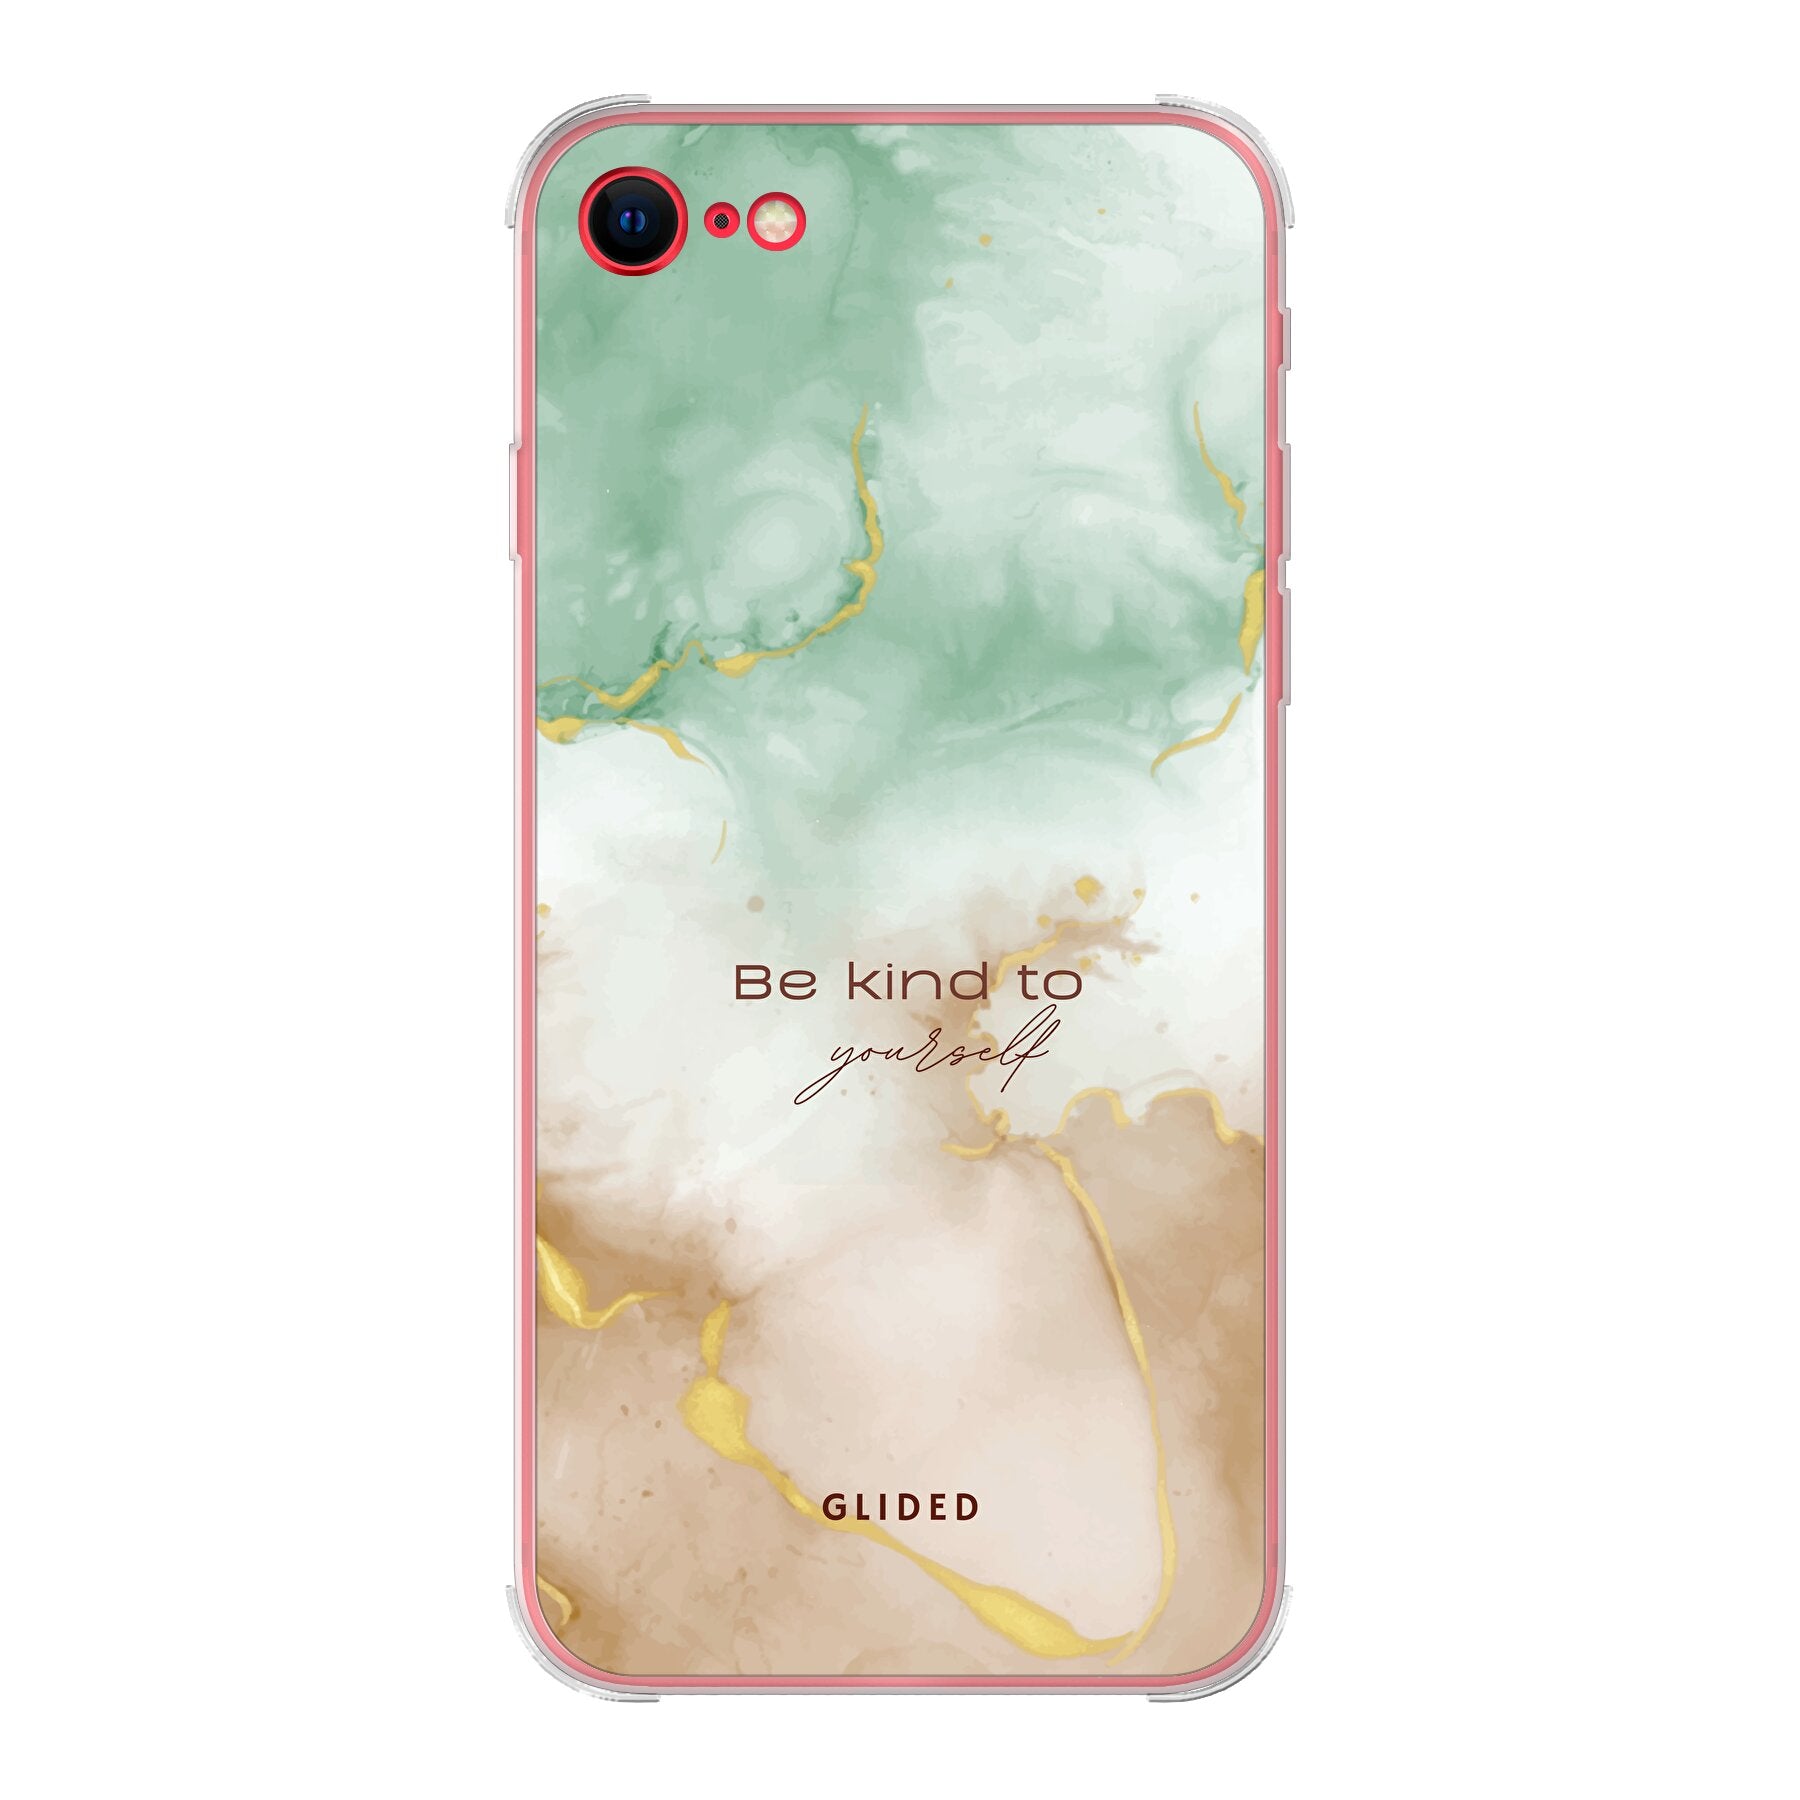 Kind to yourself - iPhone 7 Handyhülle Bumper case